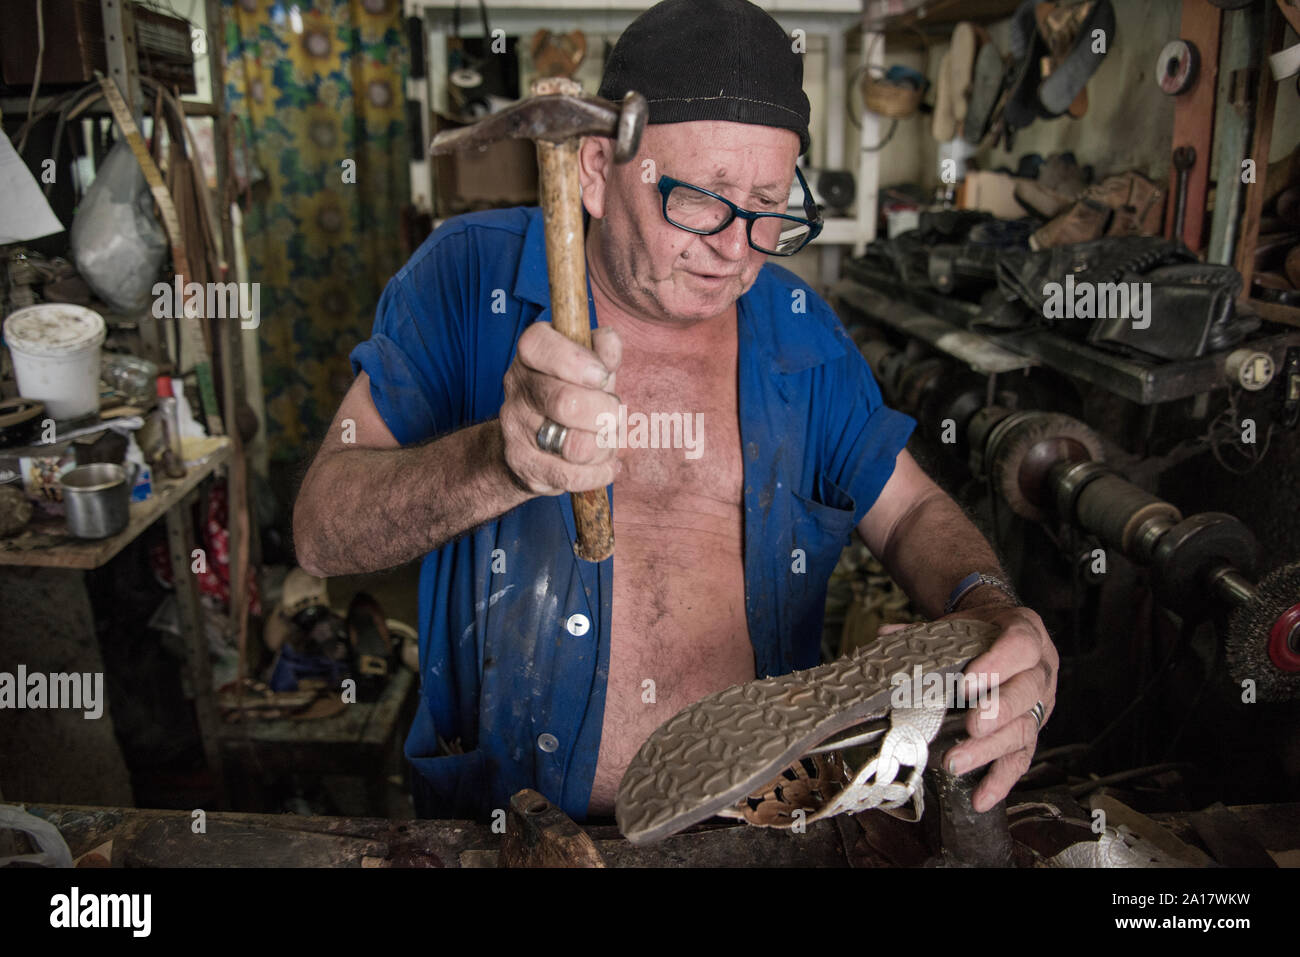 Cobbler hammering a sandal sole at shoe repairing store Stock Photo